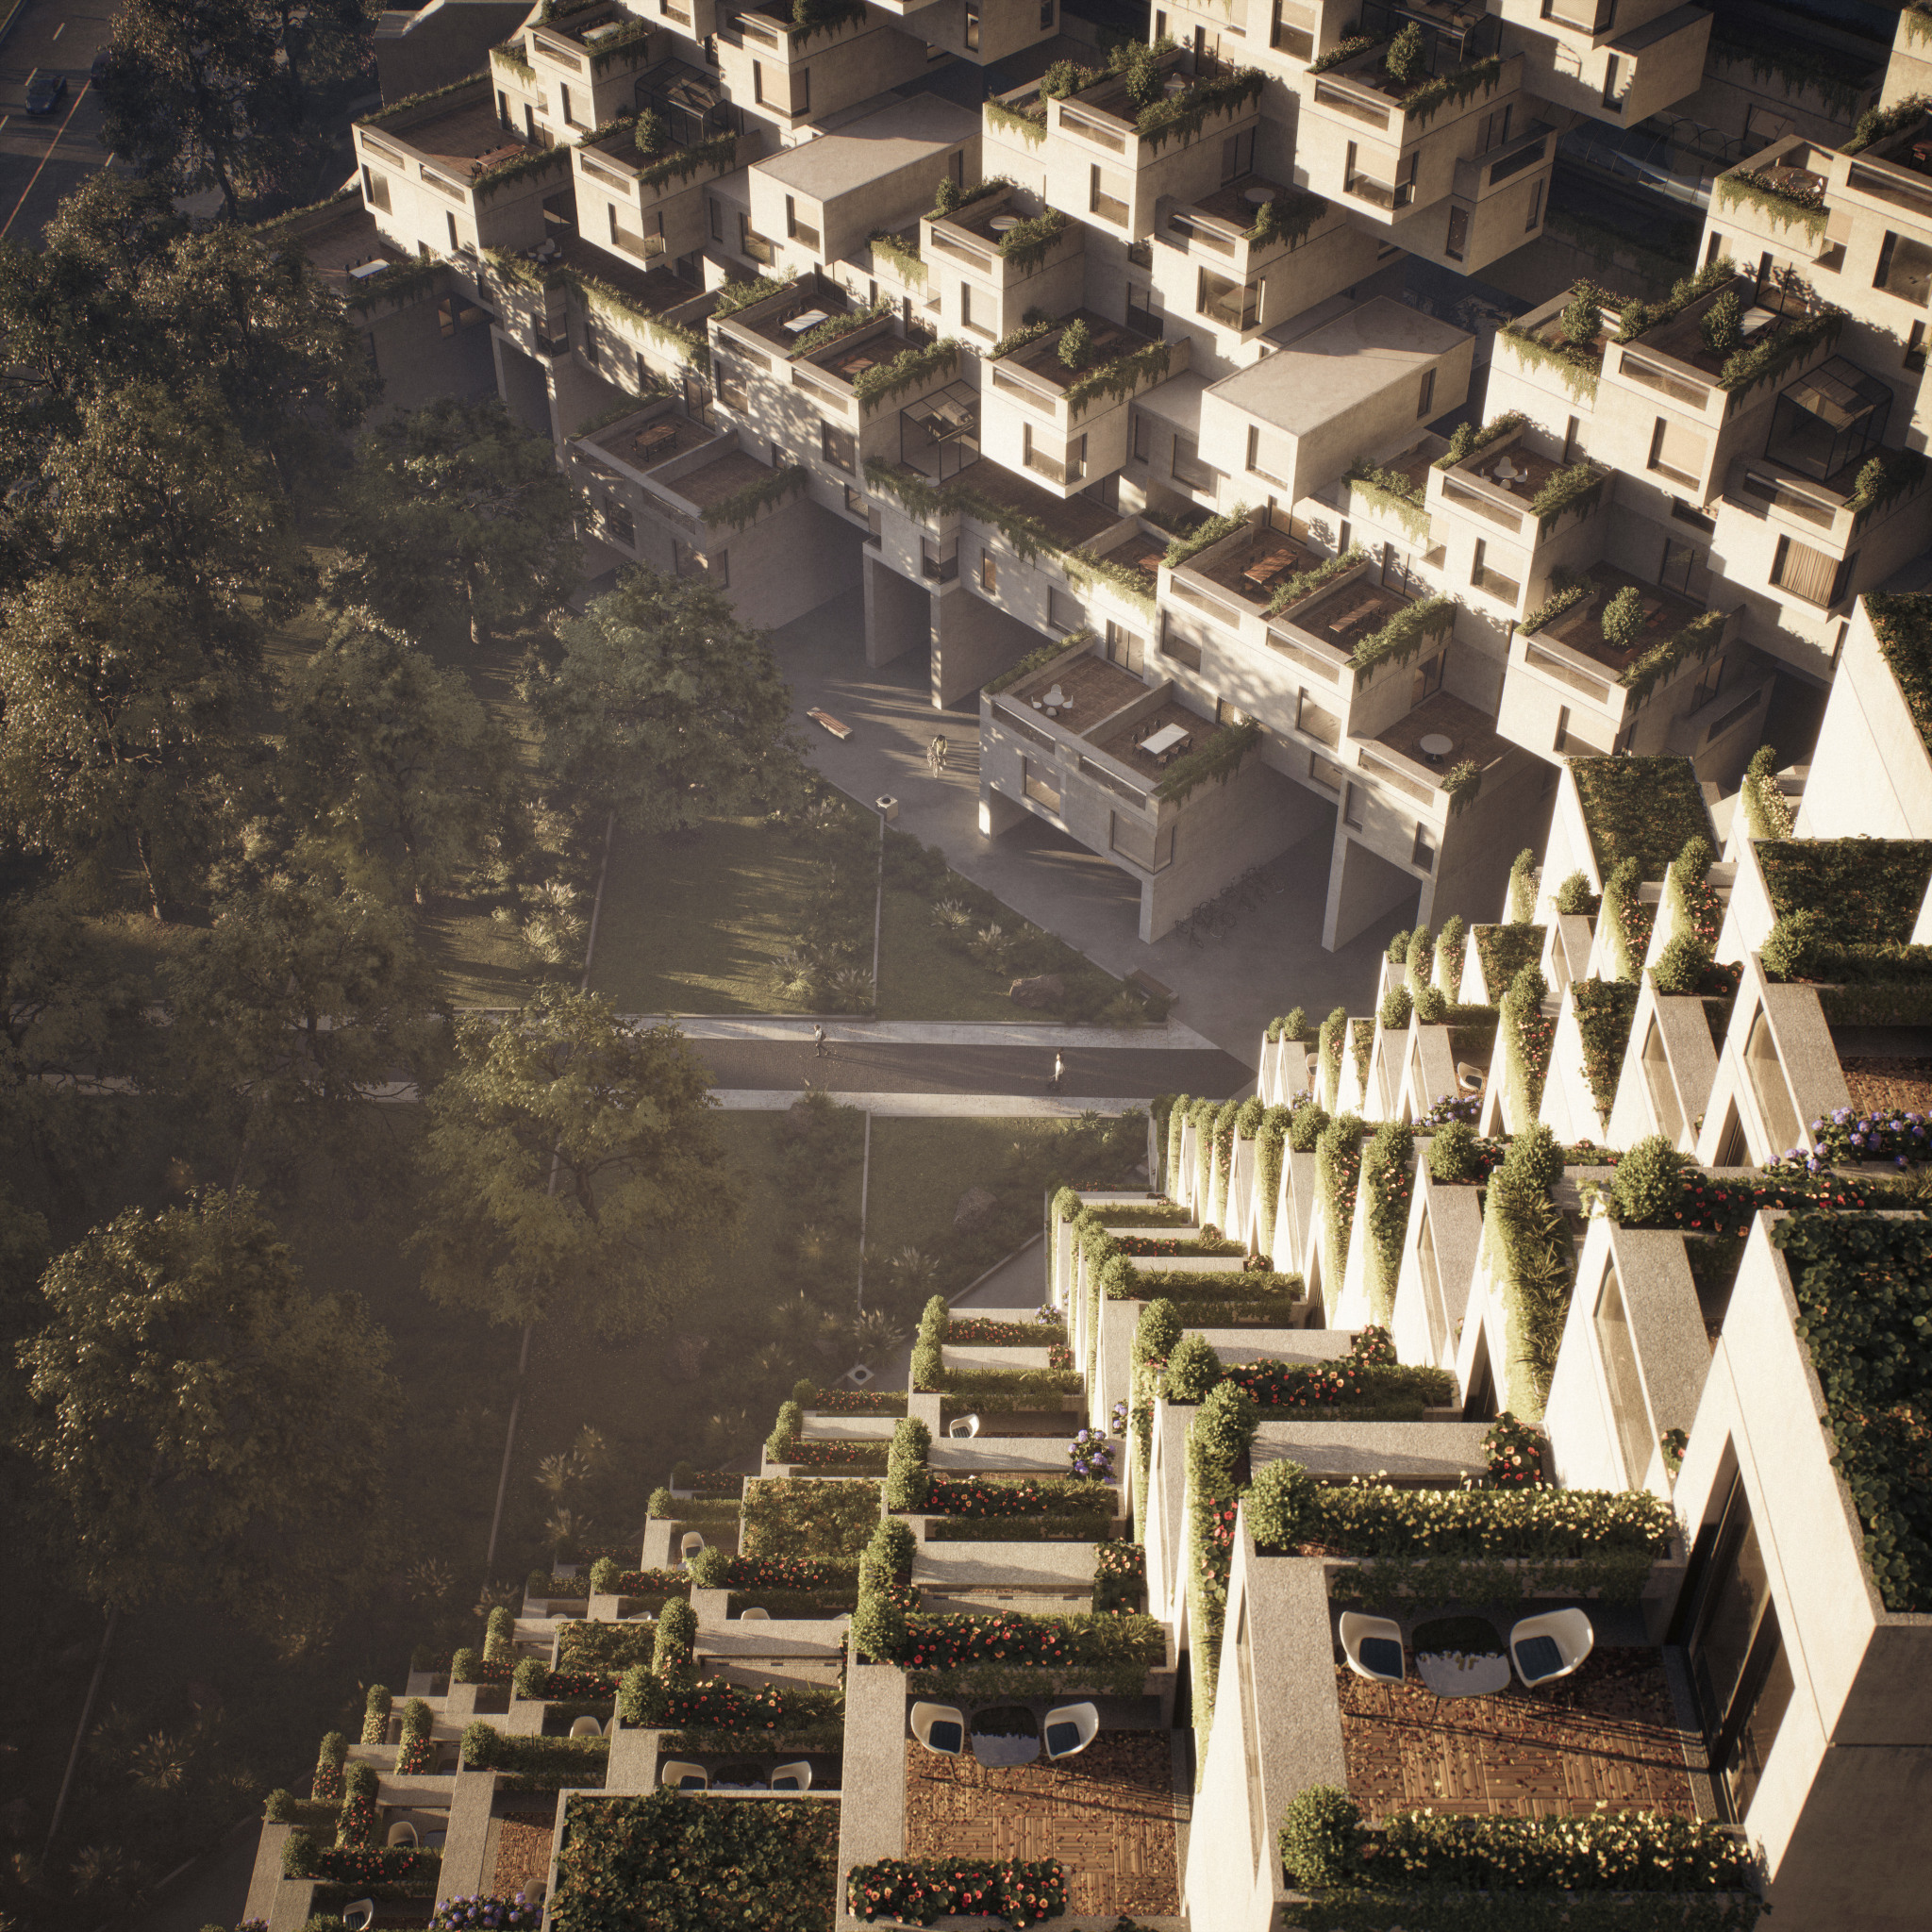 Habitat 67: A once-futuristic housing vision whose time still may come